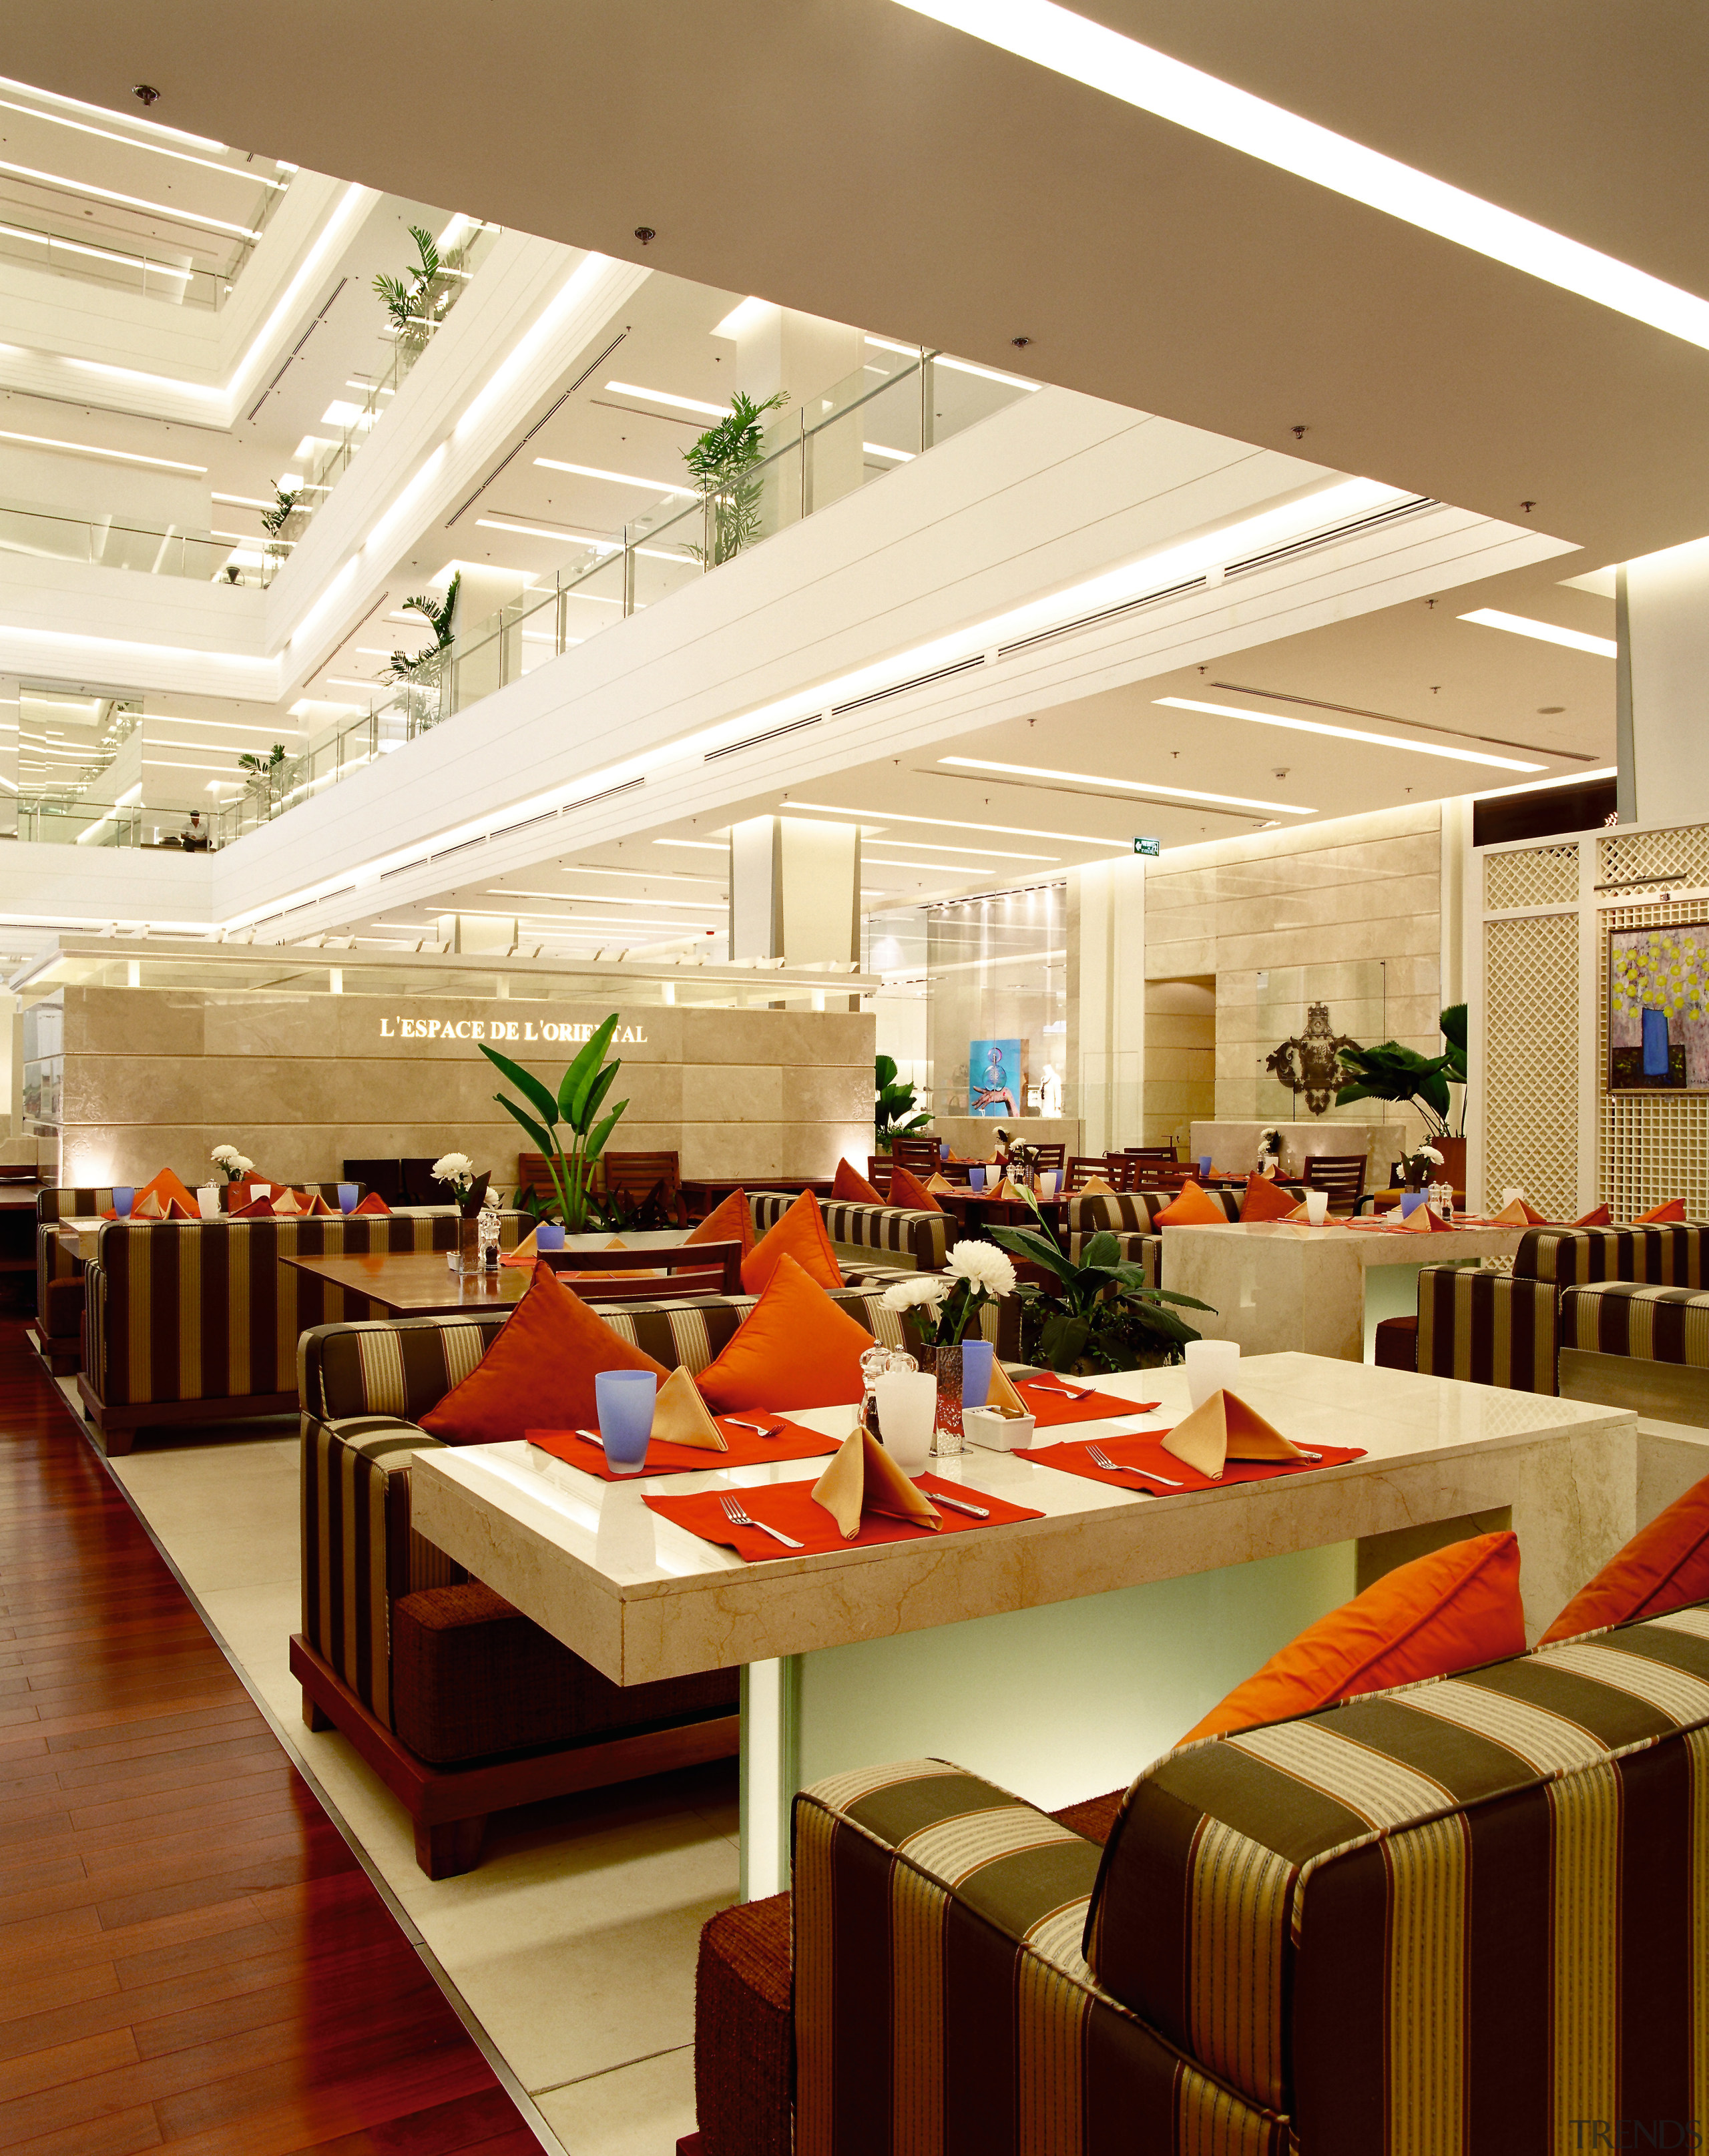 An interior view of the eatery in the ceiling, institution, interior design, restaurant, brown